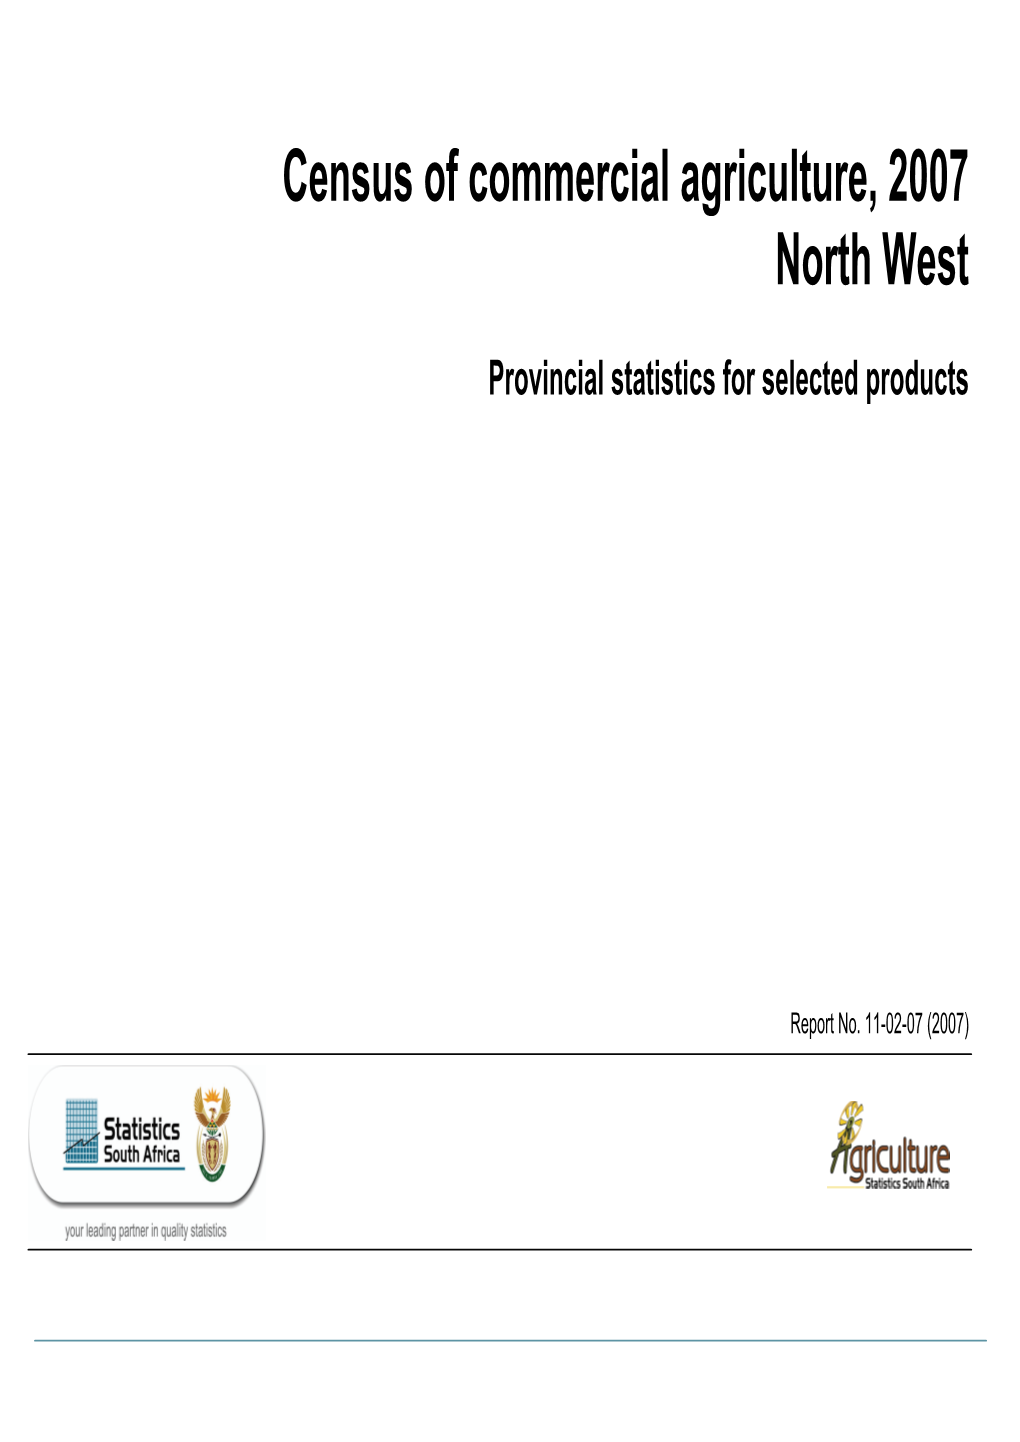 Census of Commercial Agriculture, 2007 North West